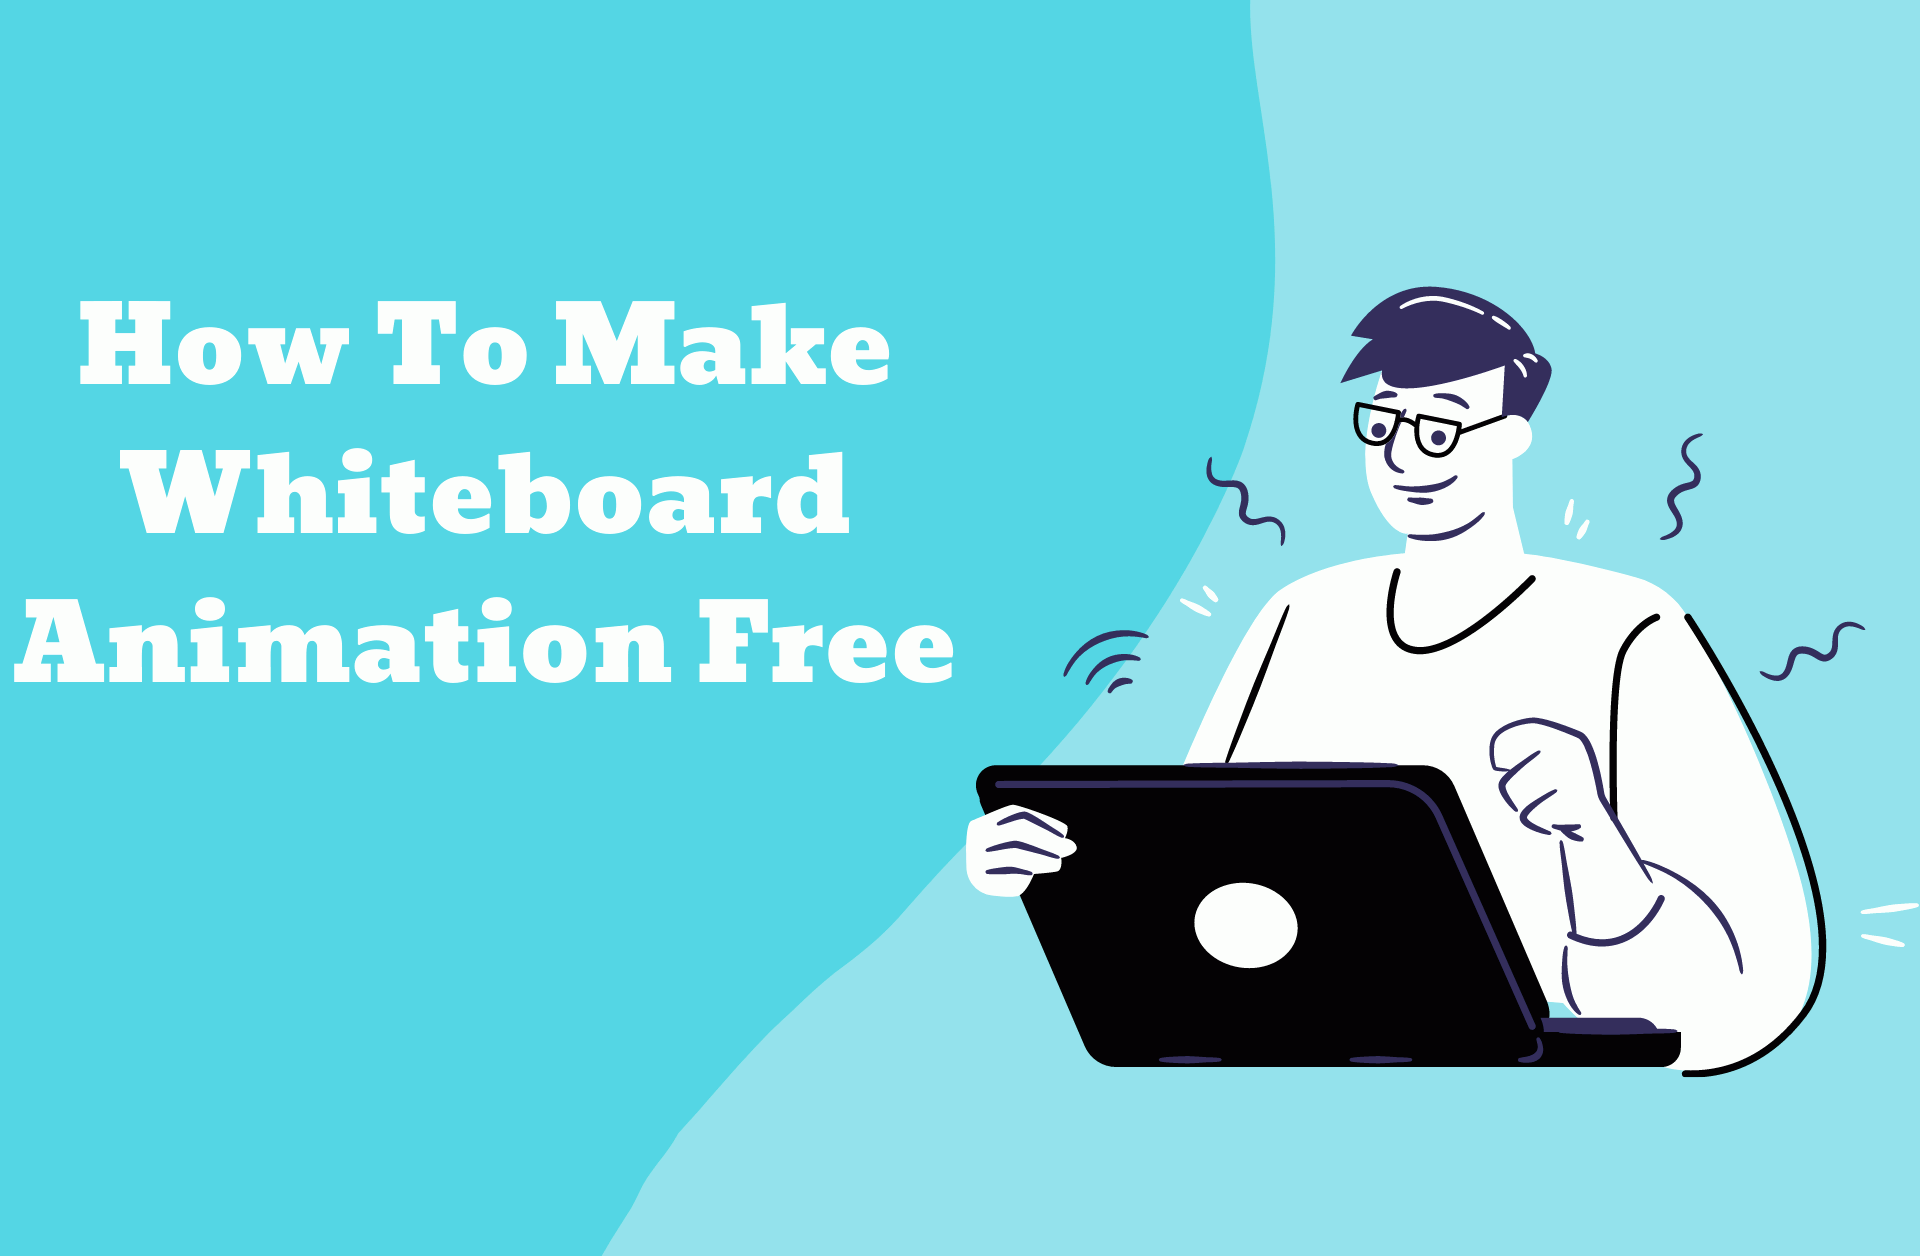 How To Make Whiteboard Animation Videos For Free Online in 2020